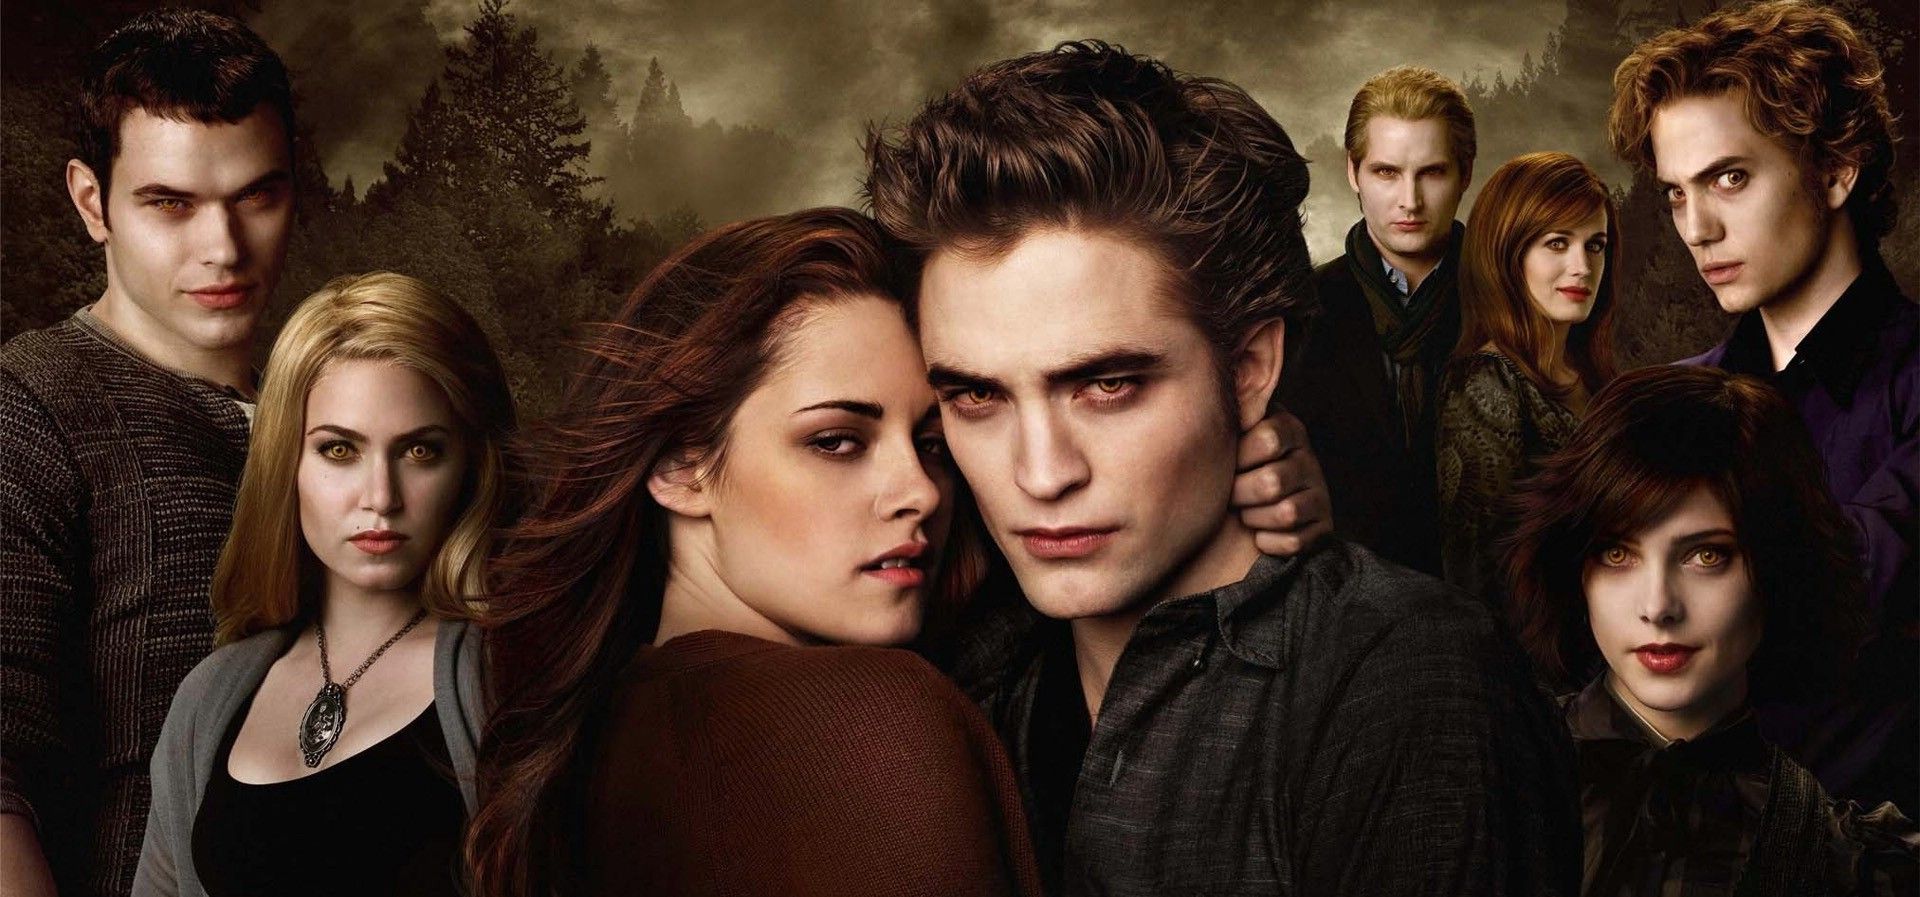 Are Lionsgate considering rebooting Twilight?